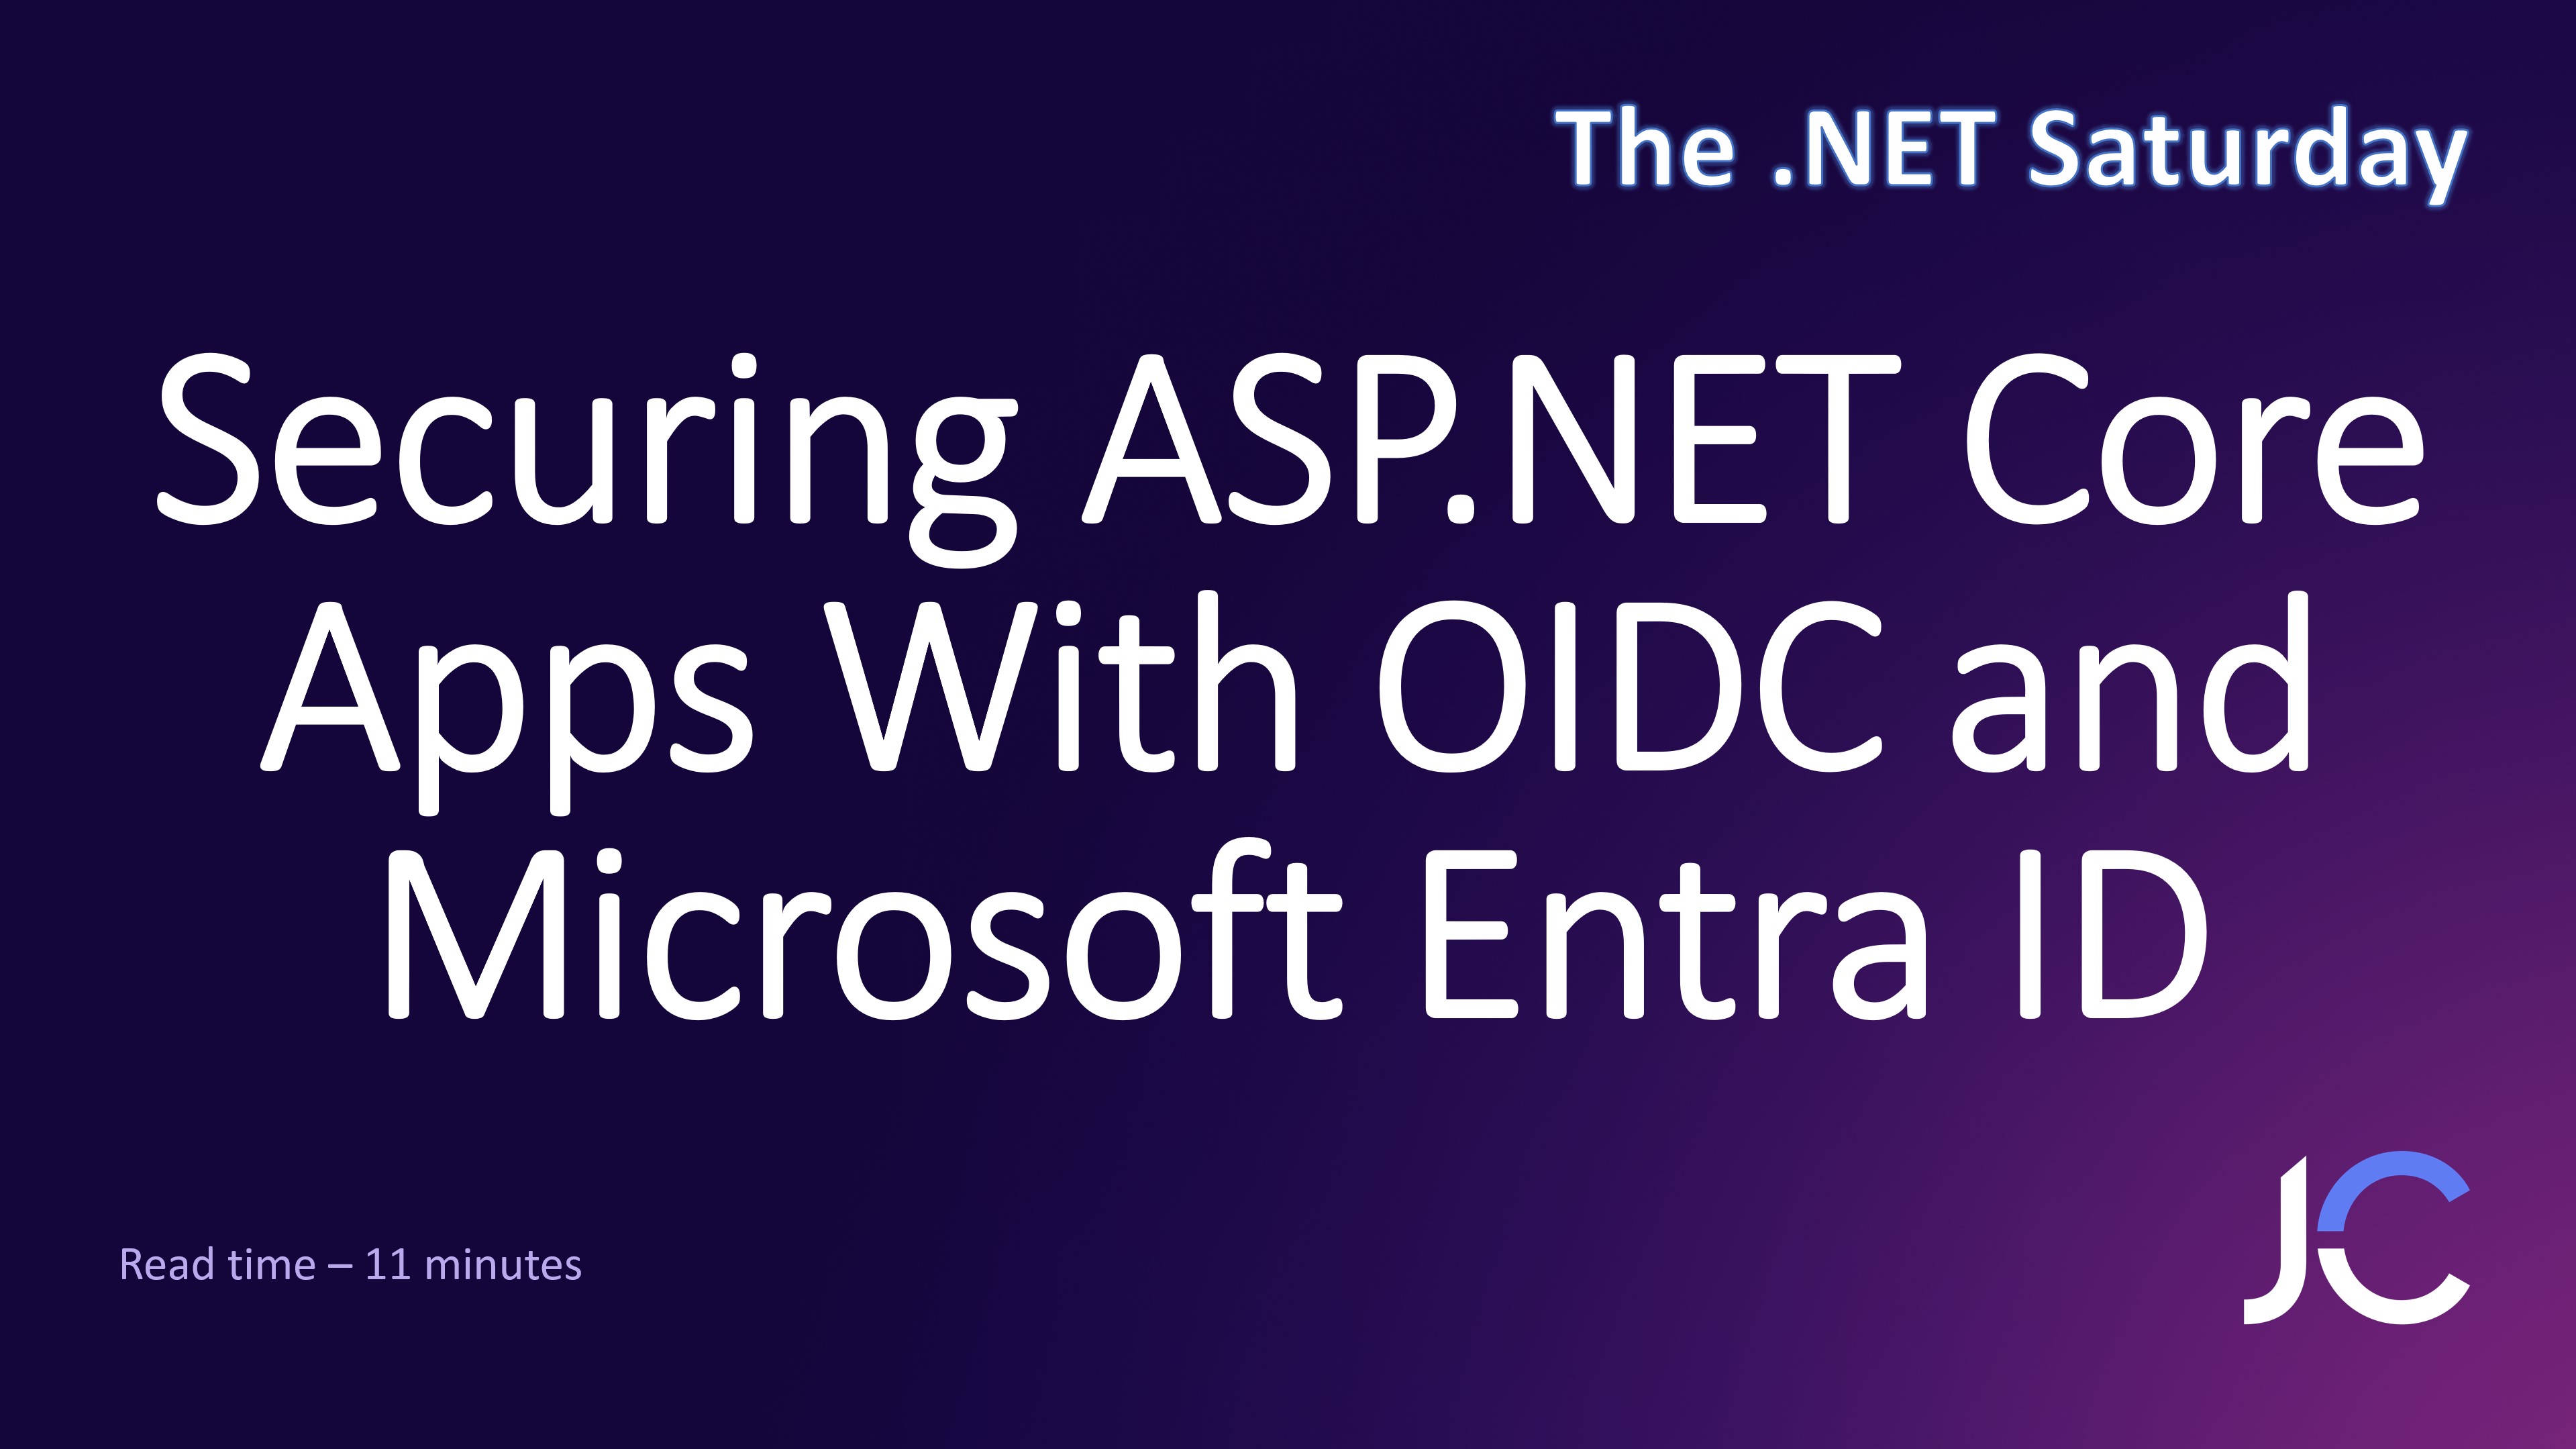 Securing ASP.NET Core Apps With OIDC and Microsoft Entra ID